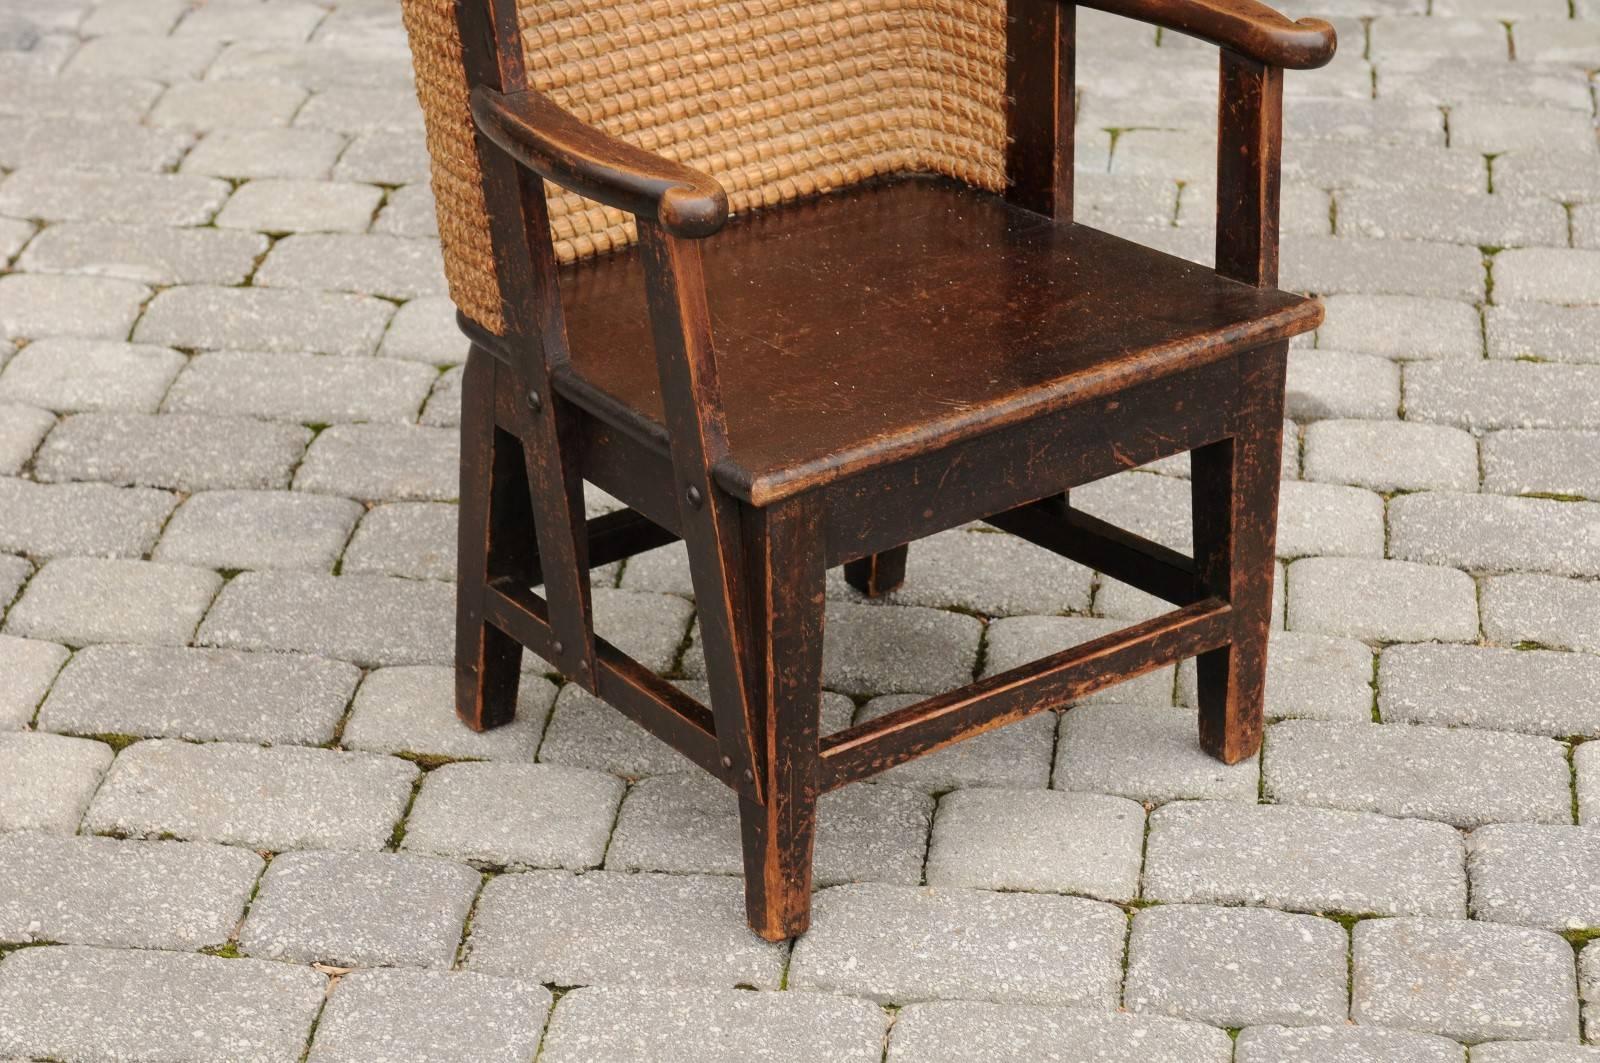 Antique Scottish Mid-19th Century Orkney Chair with Handwoven Straw Back 3